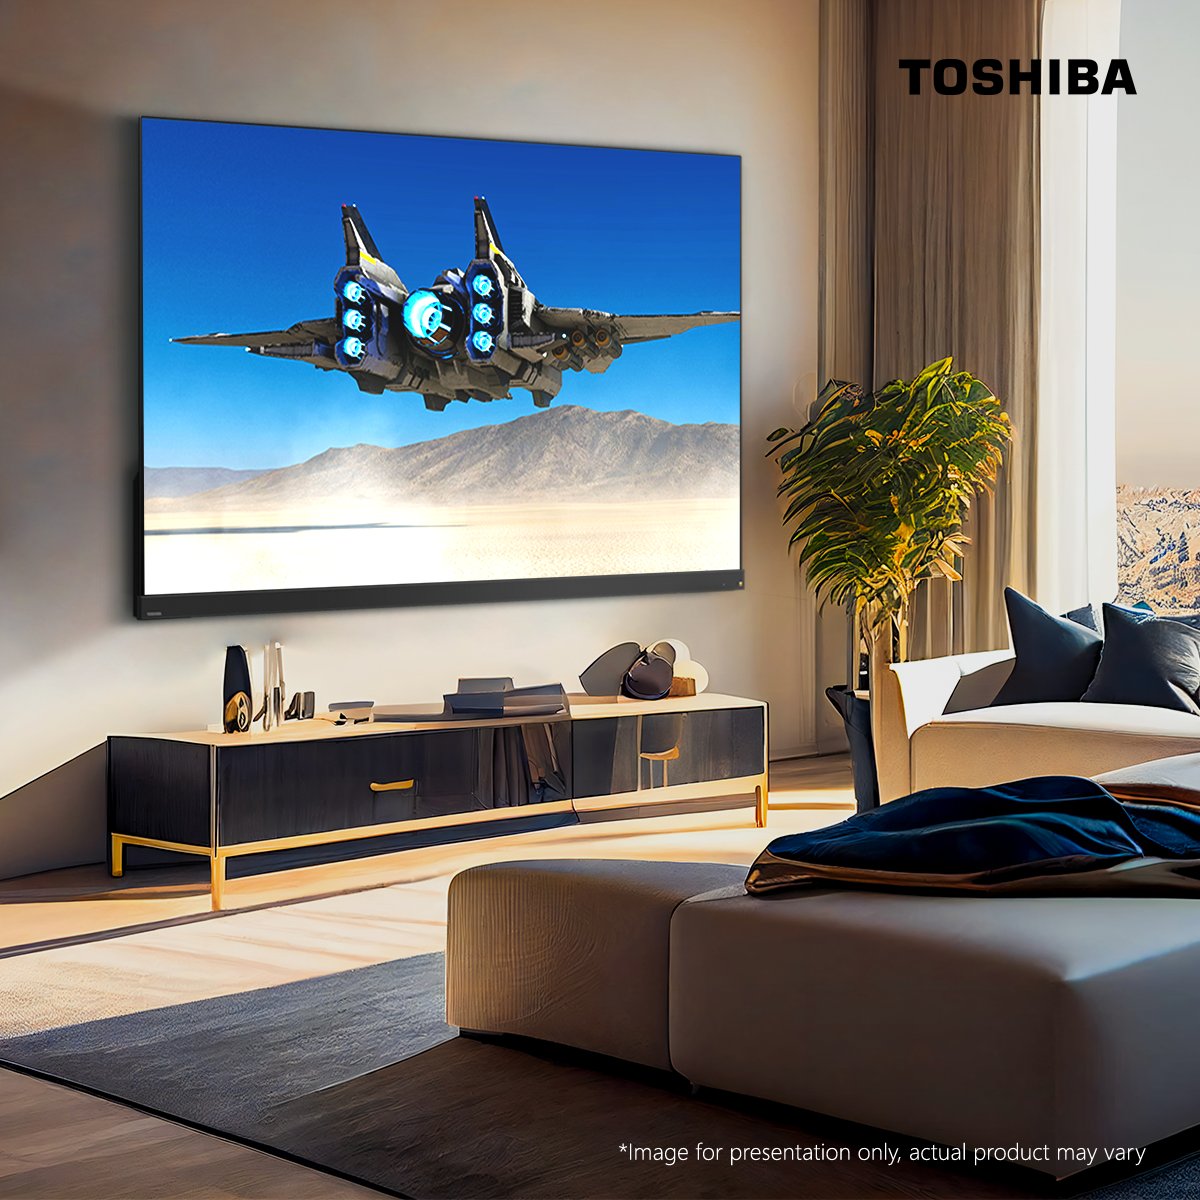 Raise the bar for home entertainment higher with Toshiba TV.

The REGZA Real Sound Adjuster cleverly adjusts treble, mid-range, and bass sounds for an unforgettably unique audio experience.
#HomeEntertainment #ToshibaTV #EssentialDesign #DreamHome #MediaRoom #Theatre